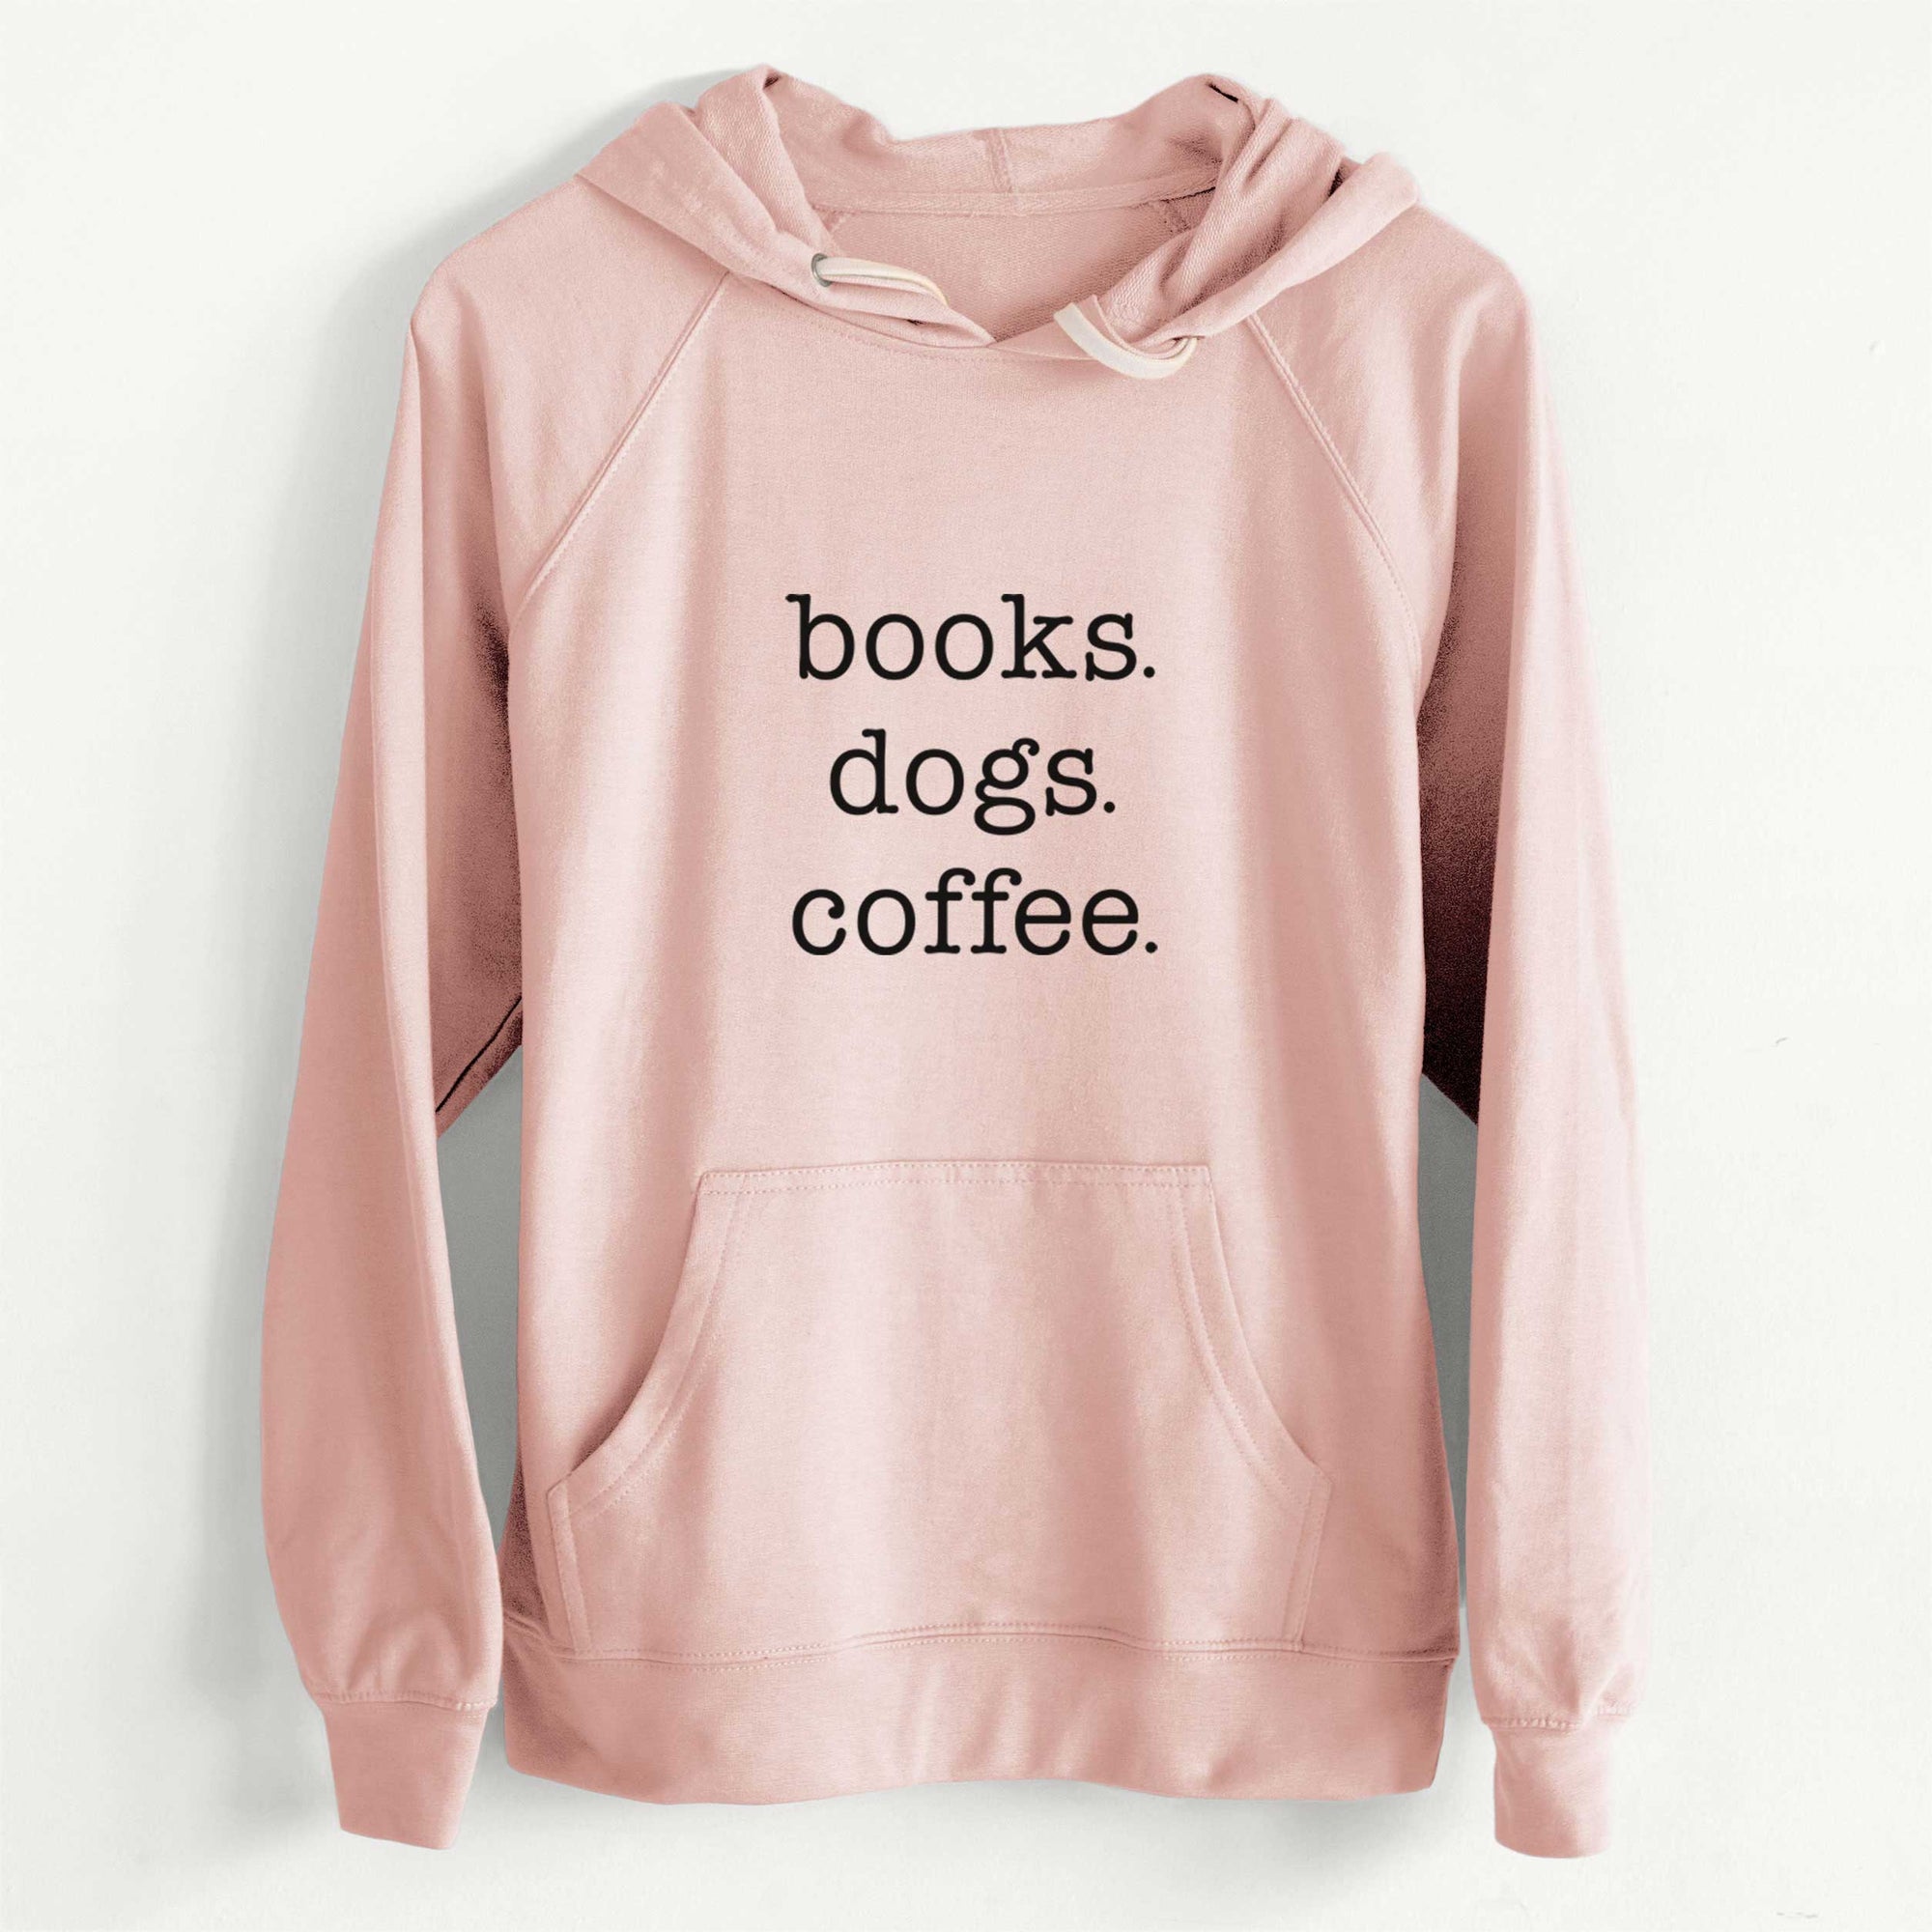 books. dogs. coffee. - Unisex Loopback Terry Hoodie